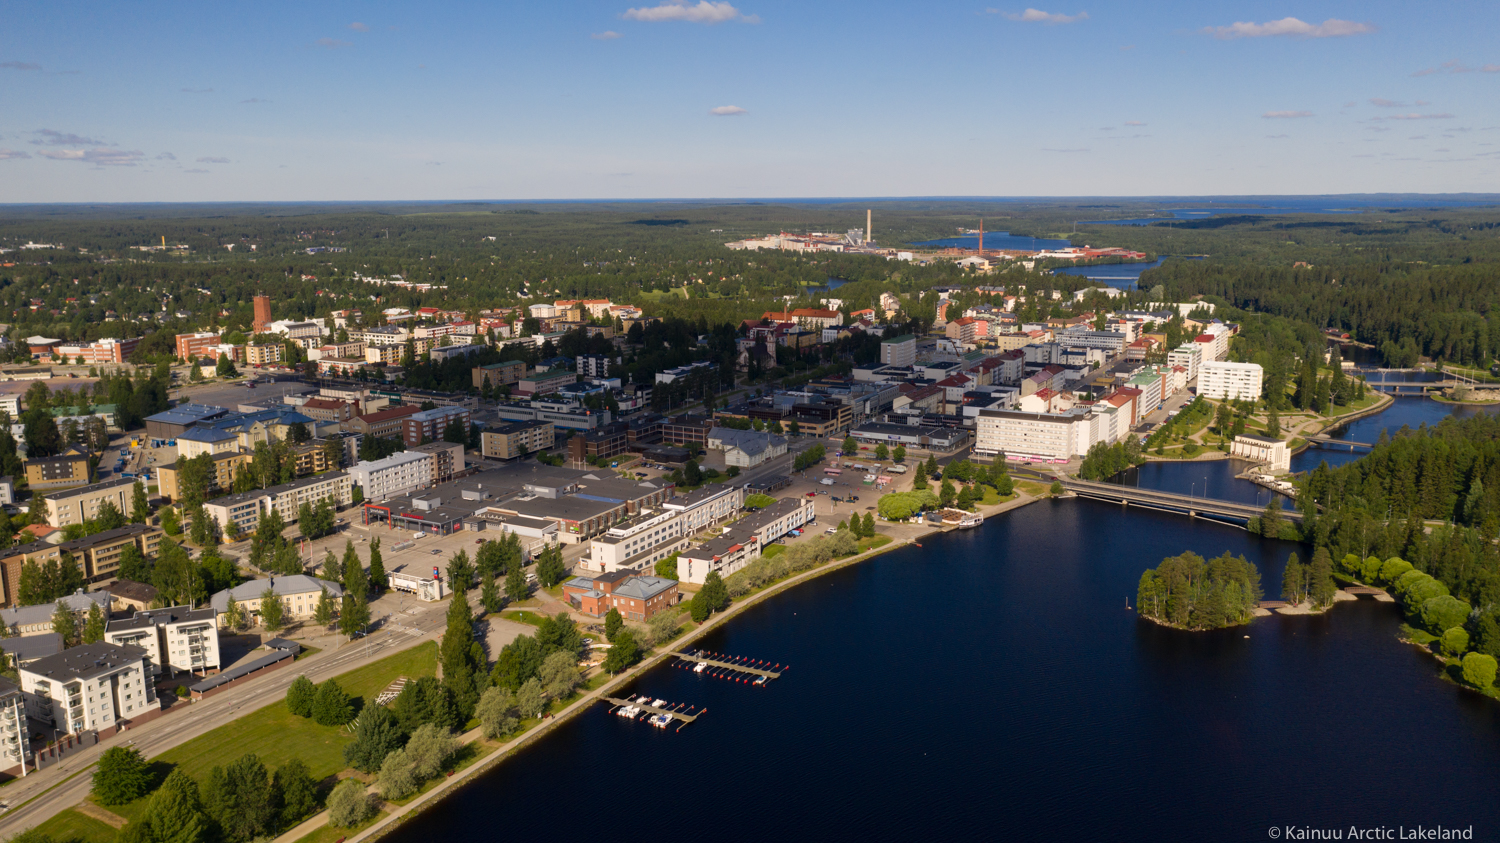 Overview of the City of Kajaani